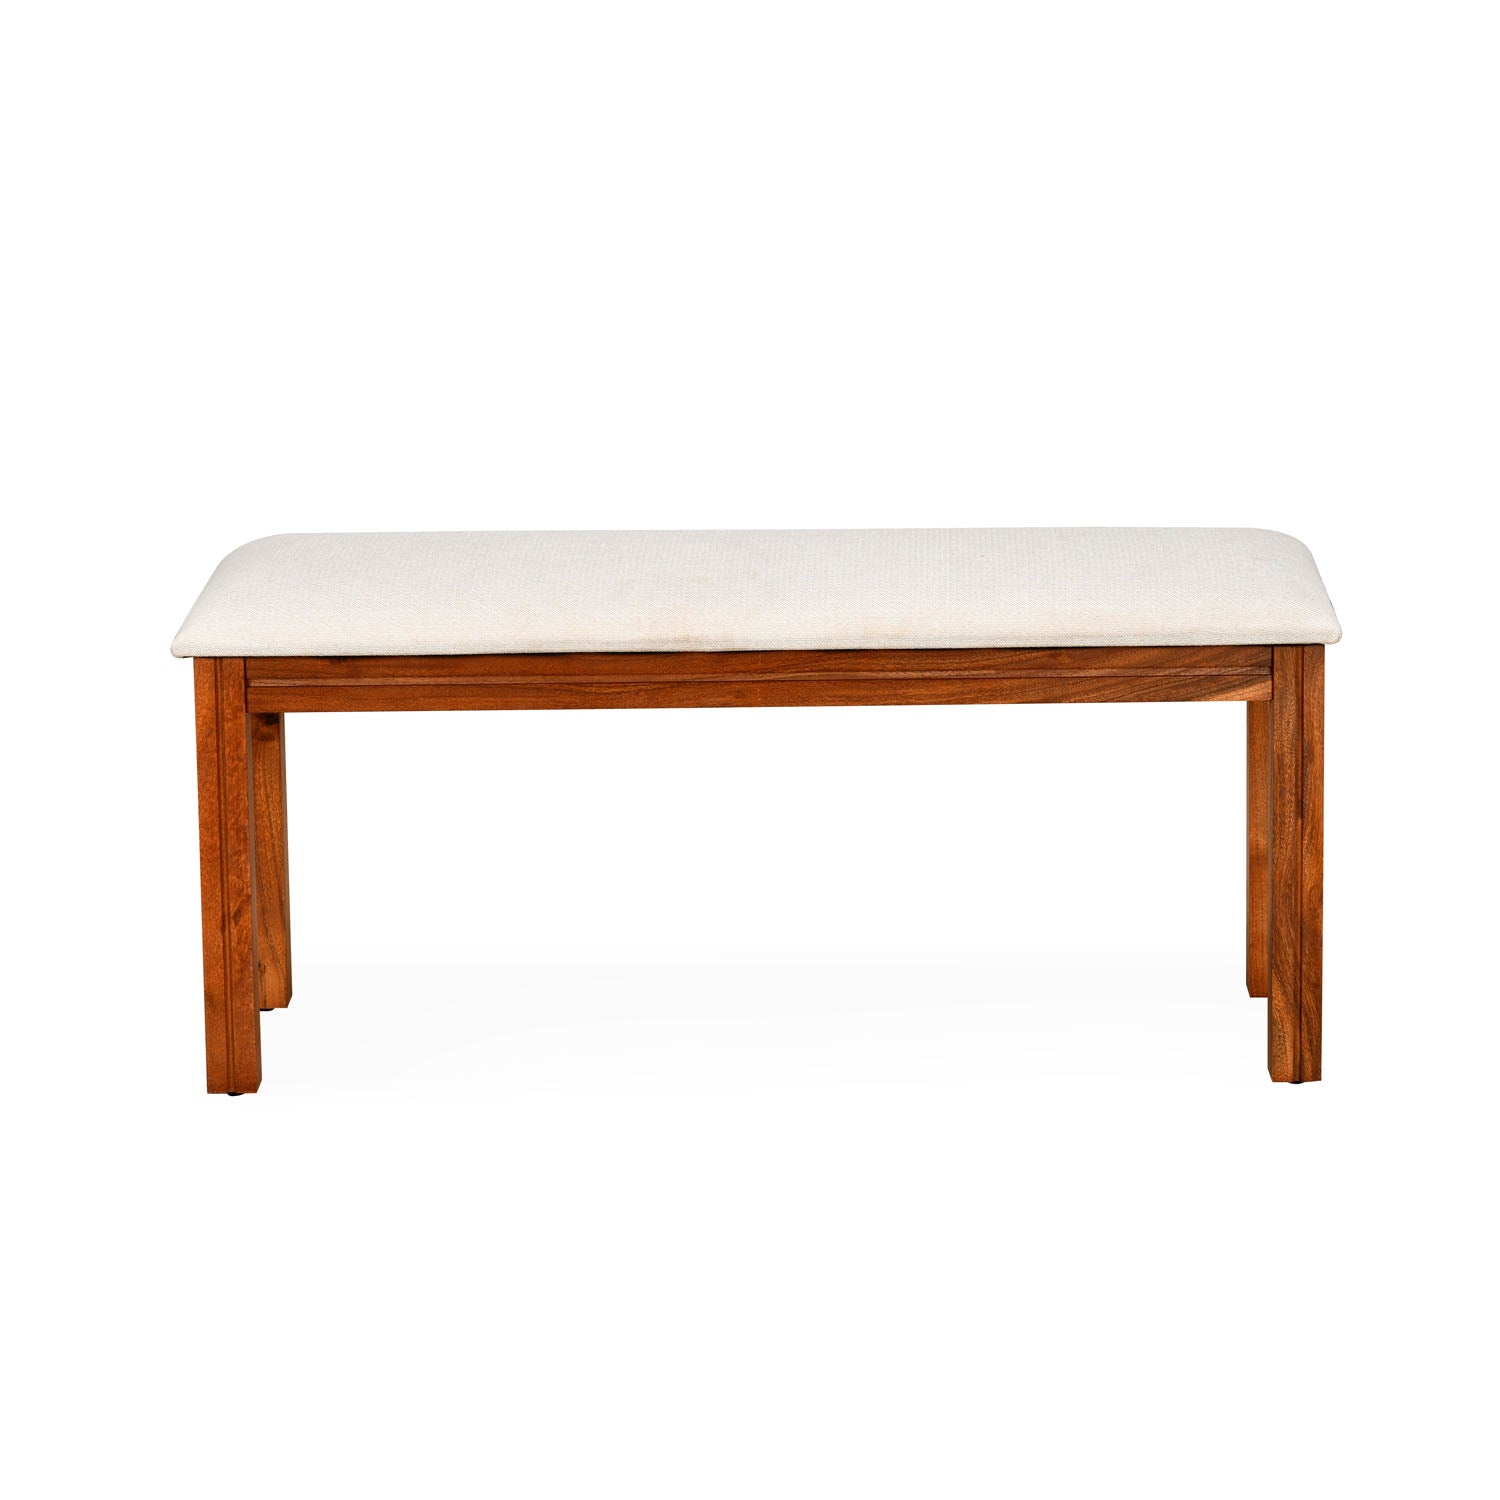 Vera 4 Searer Solid Wood Dining Bench (Honey Brown)